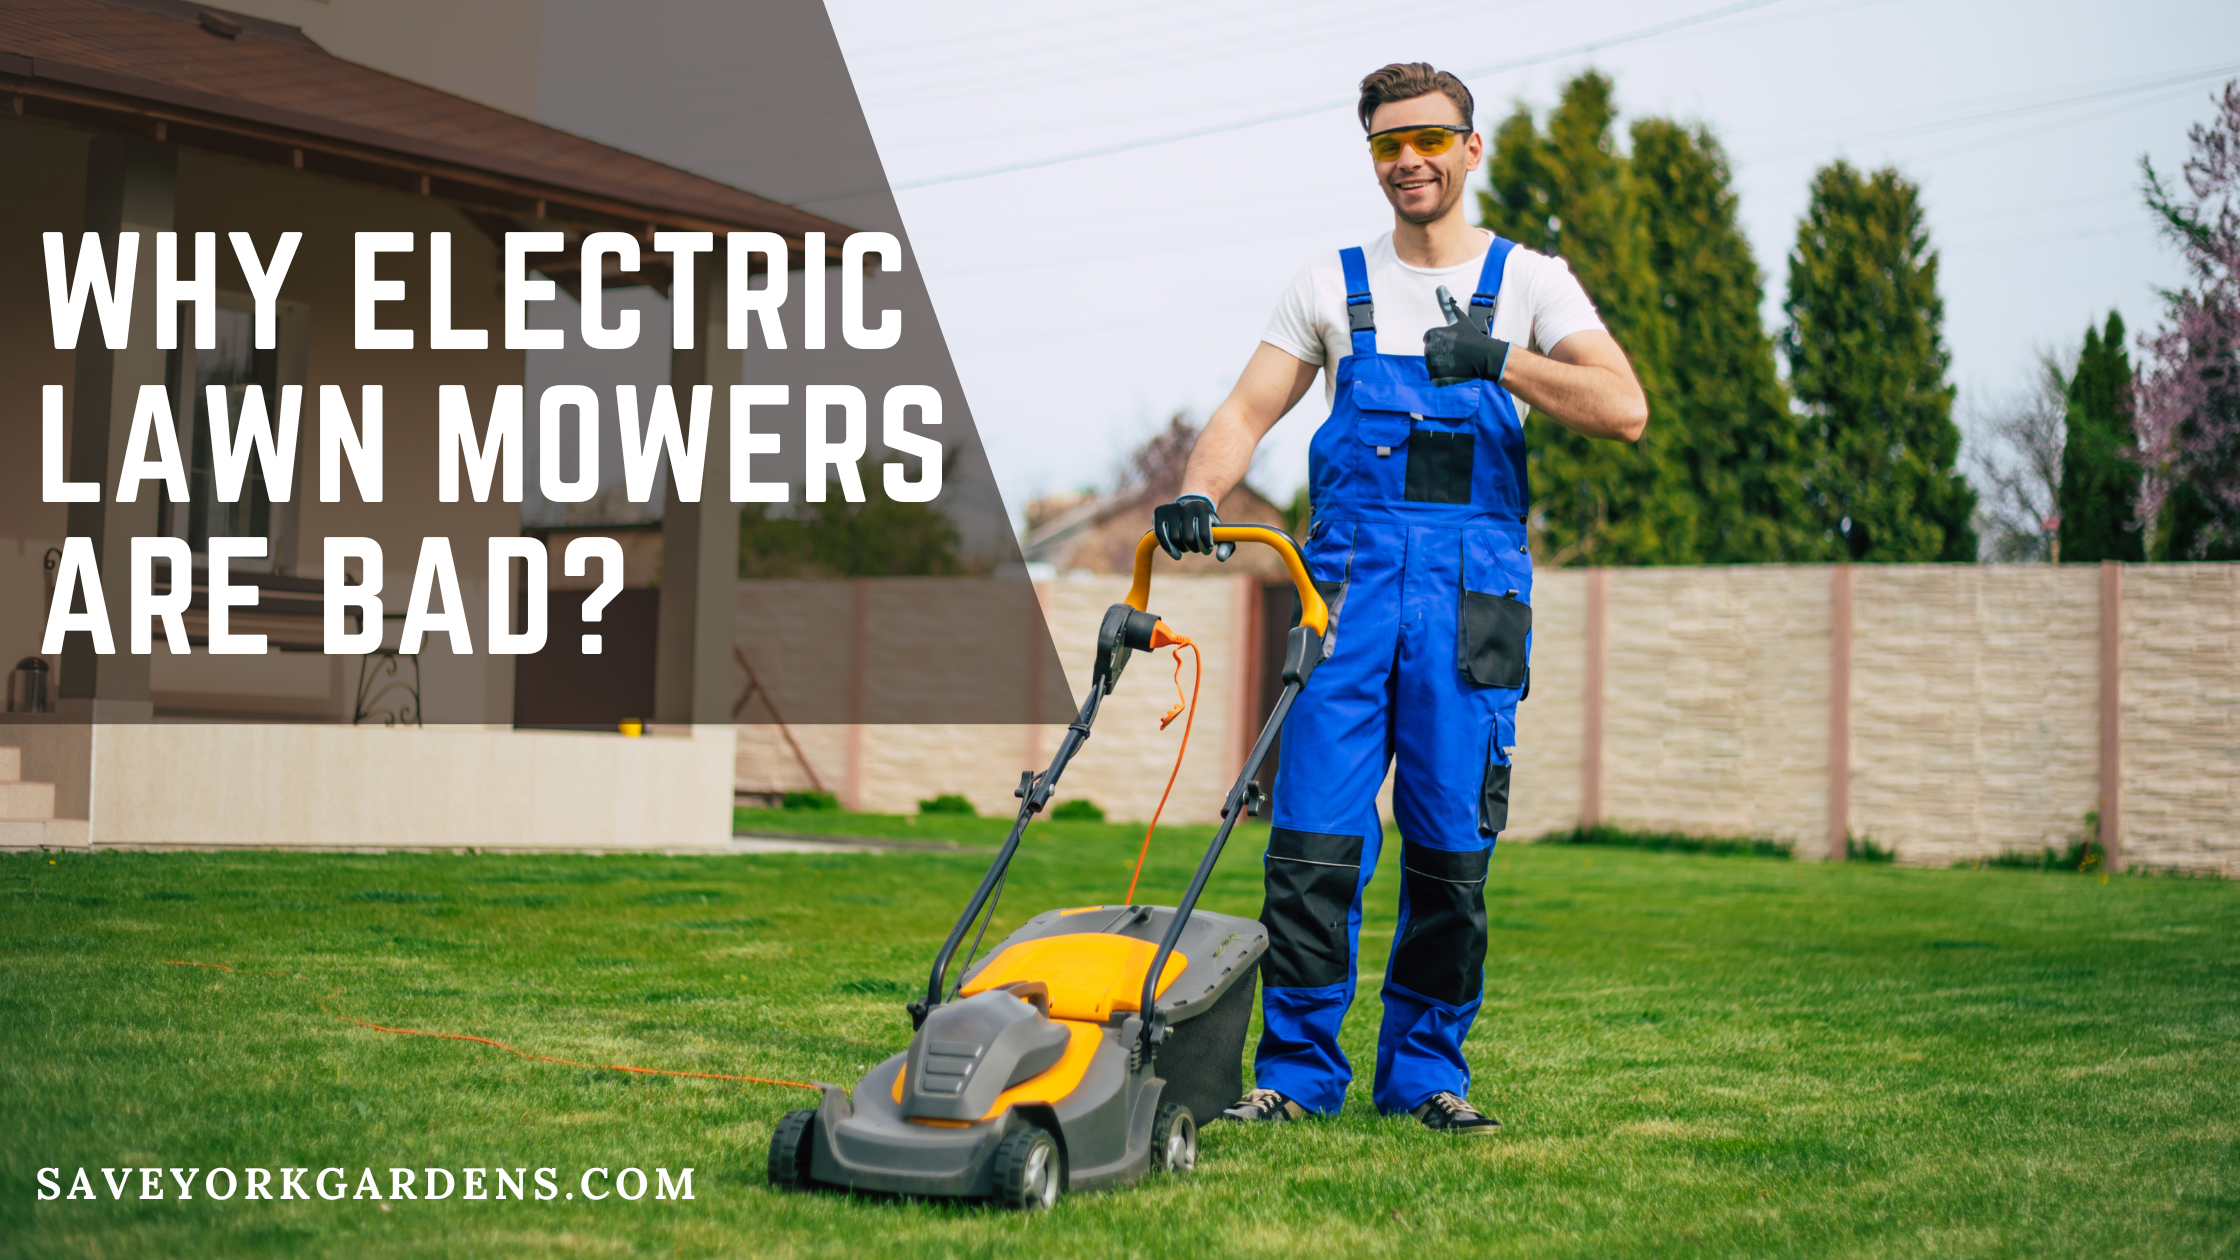 Why Electric Lawn Mowers Are Bad?